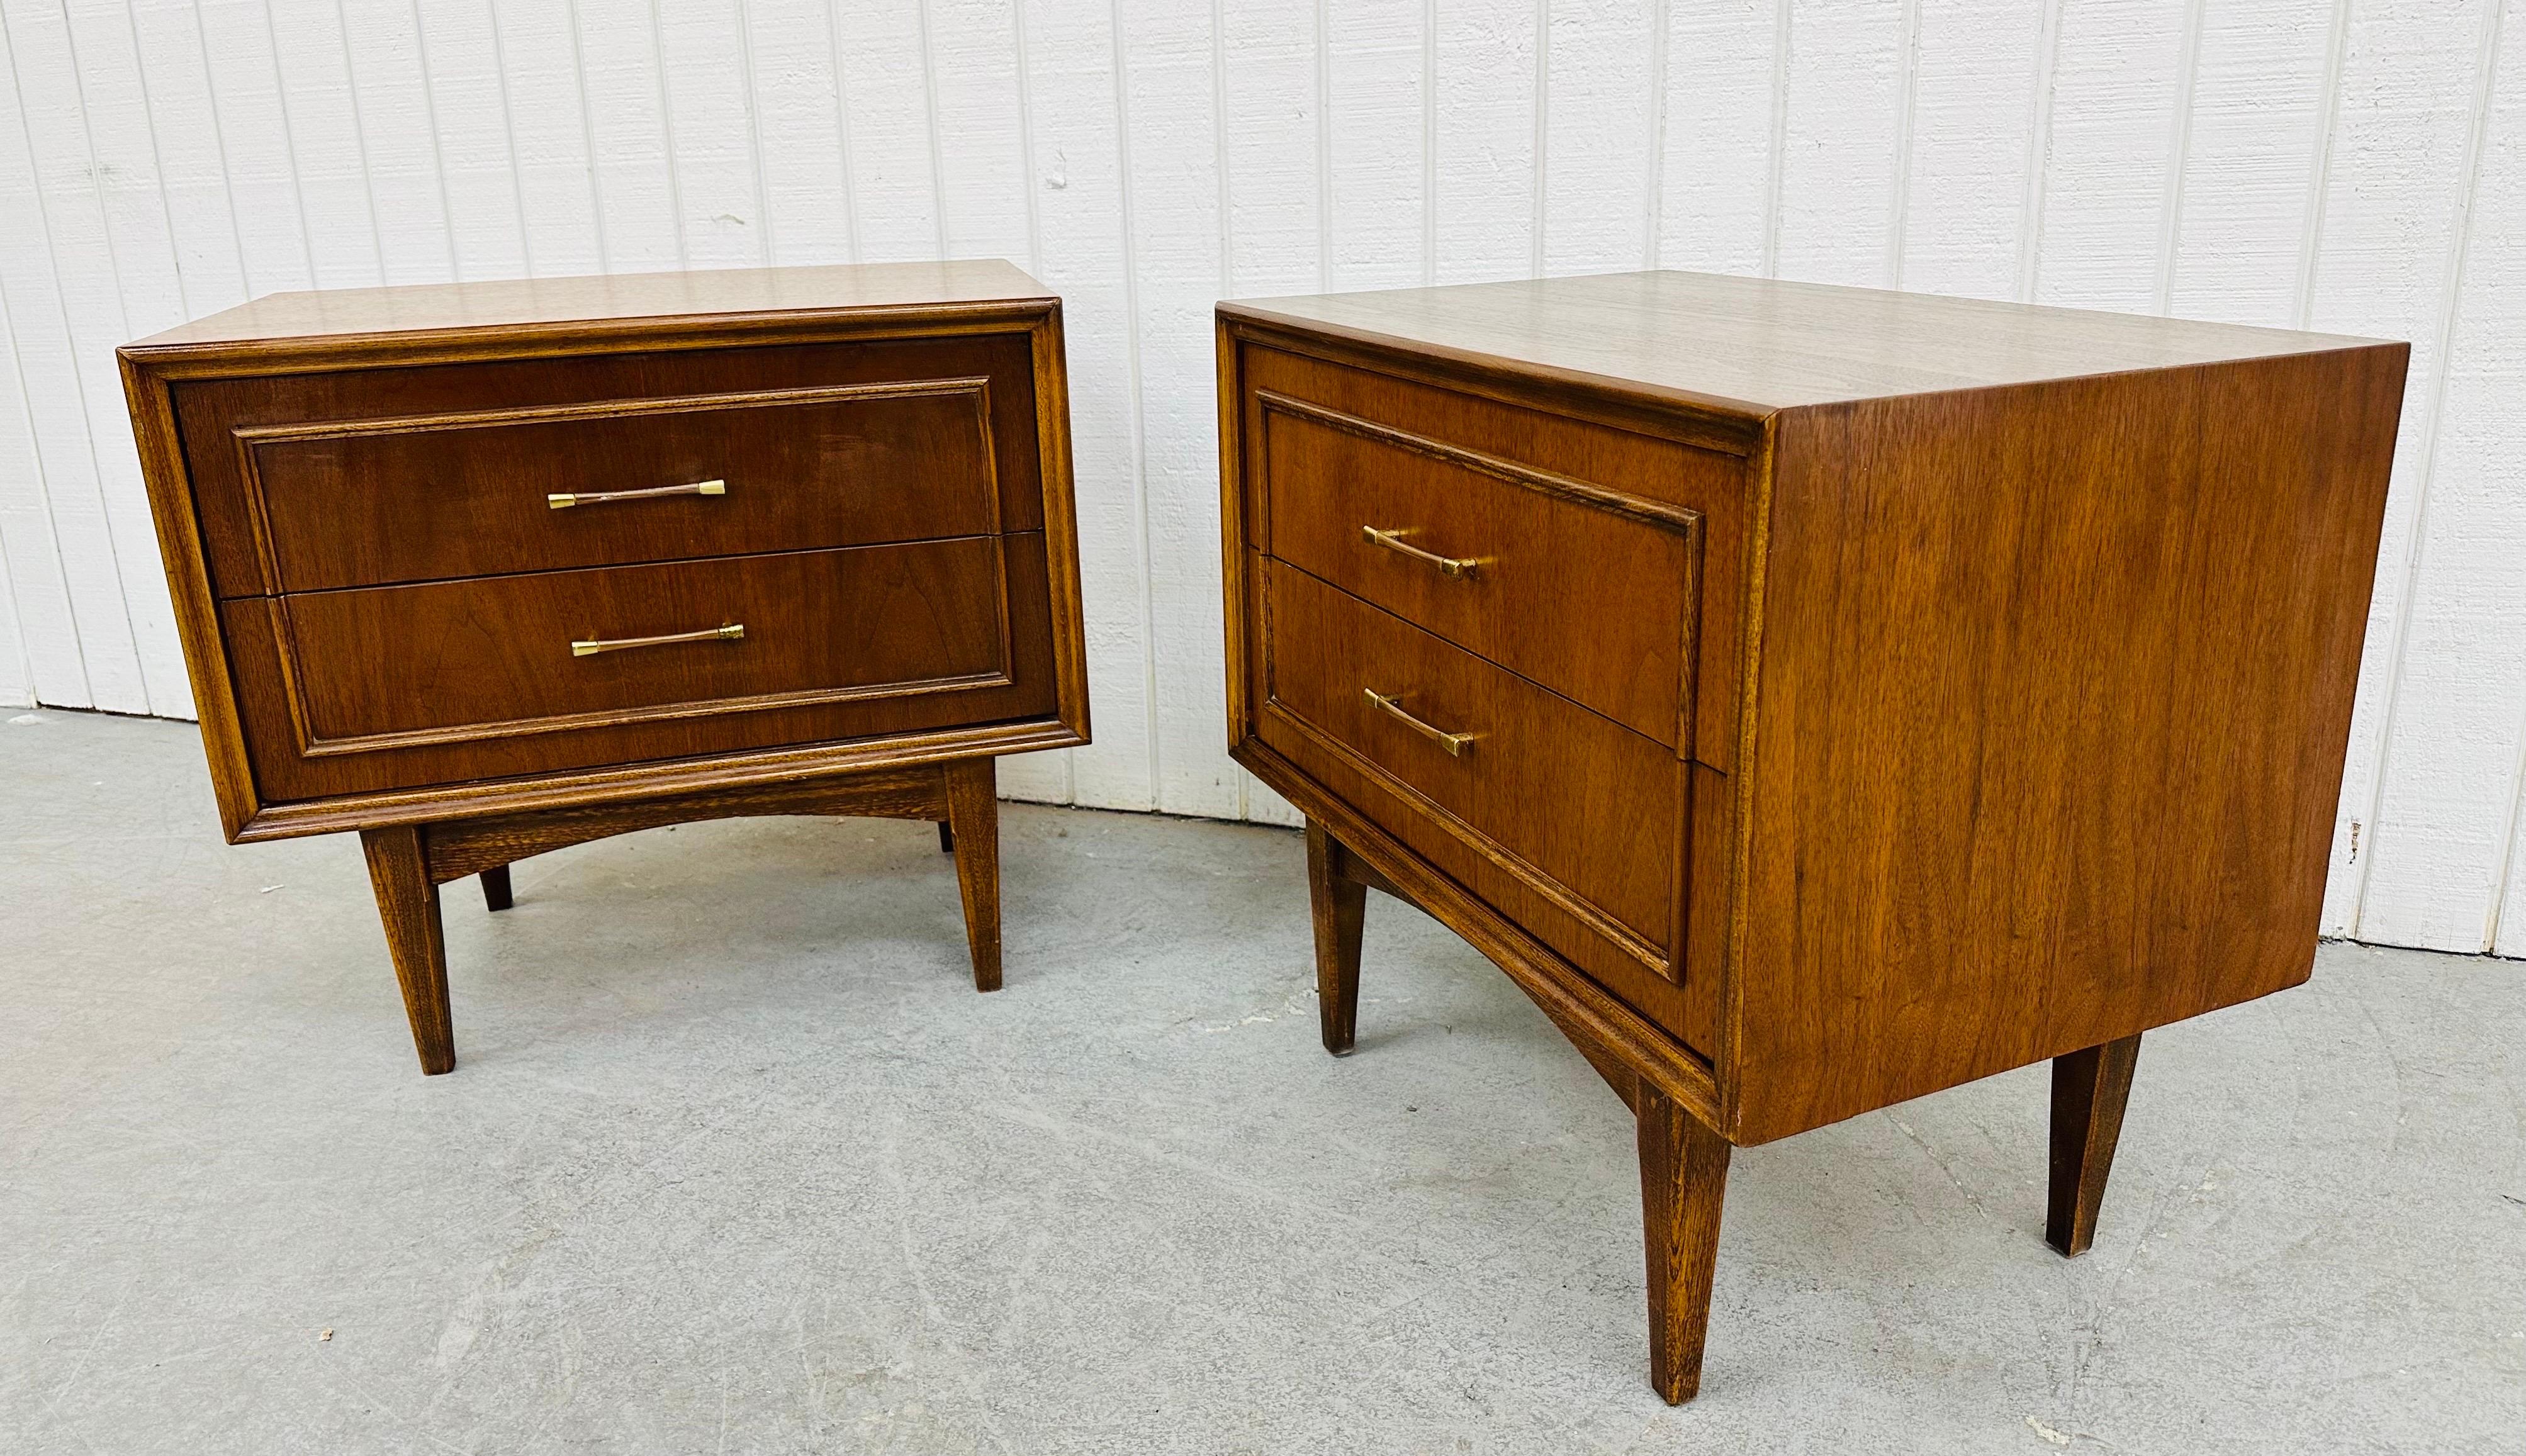 This listing is for a pair of Mid-Century Modern Walnut Nightstands. Featuring a straight line design, two drawers for storage, original brass pulls, modern legs, and a beautiful walnut finish. This is an exceptional combination of quality and